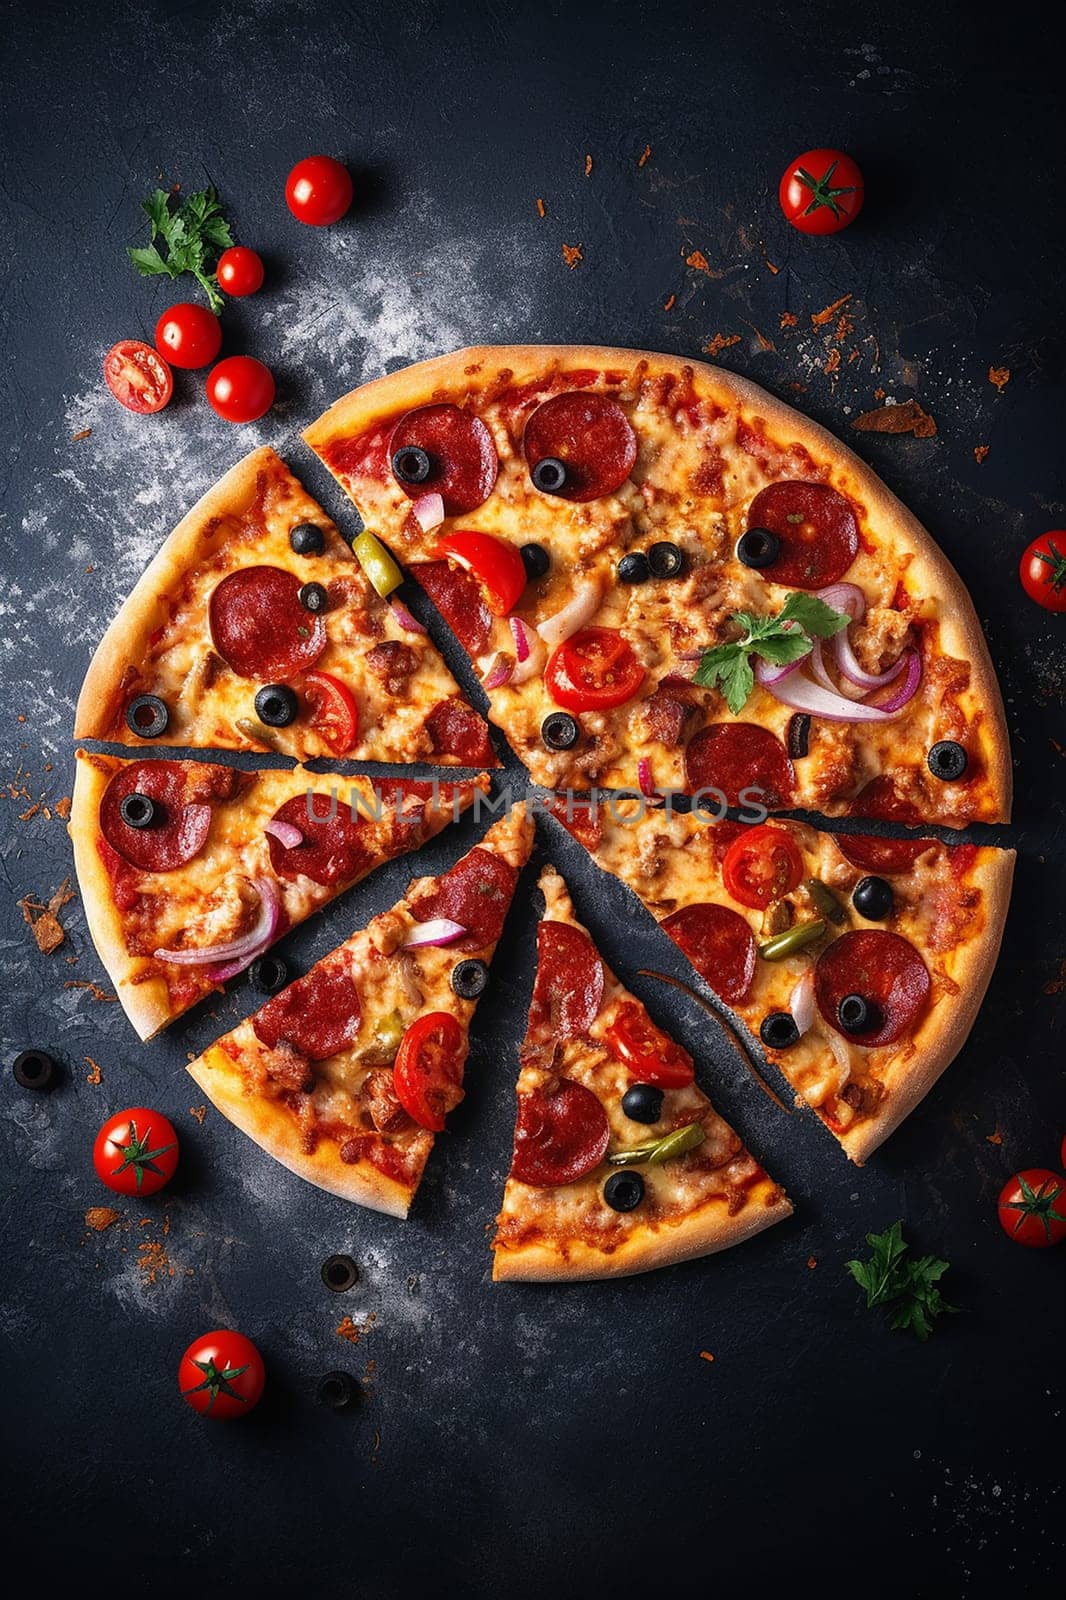 Whole pepperoni pizza with olives and tomatoes on dark surface.